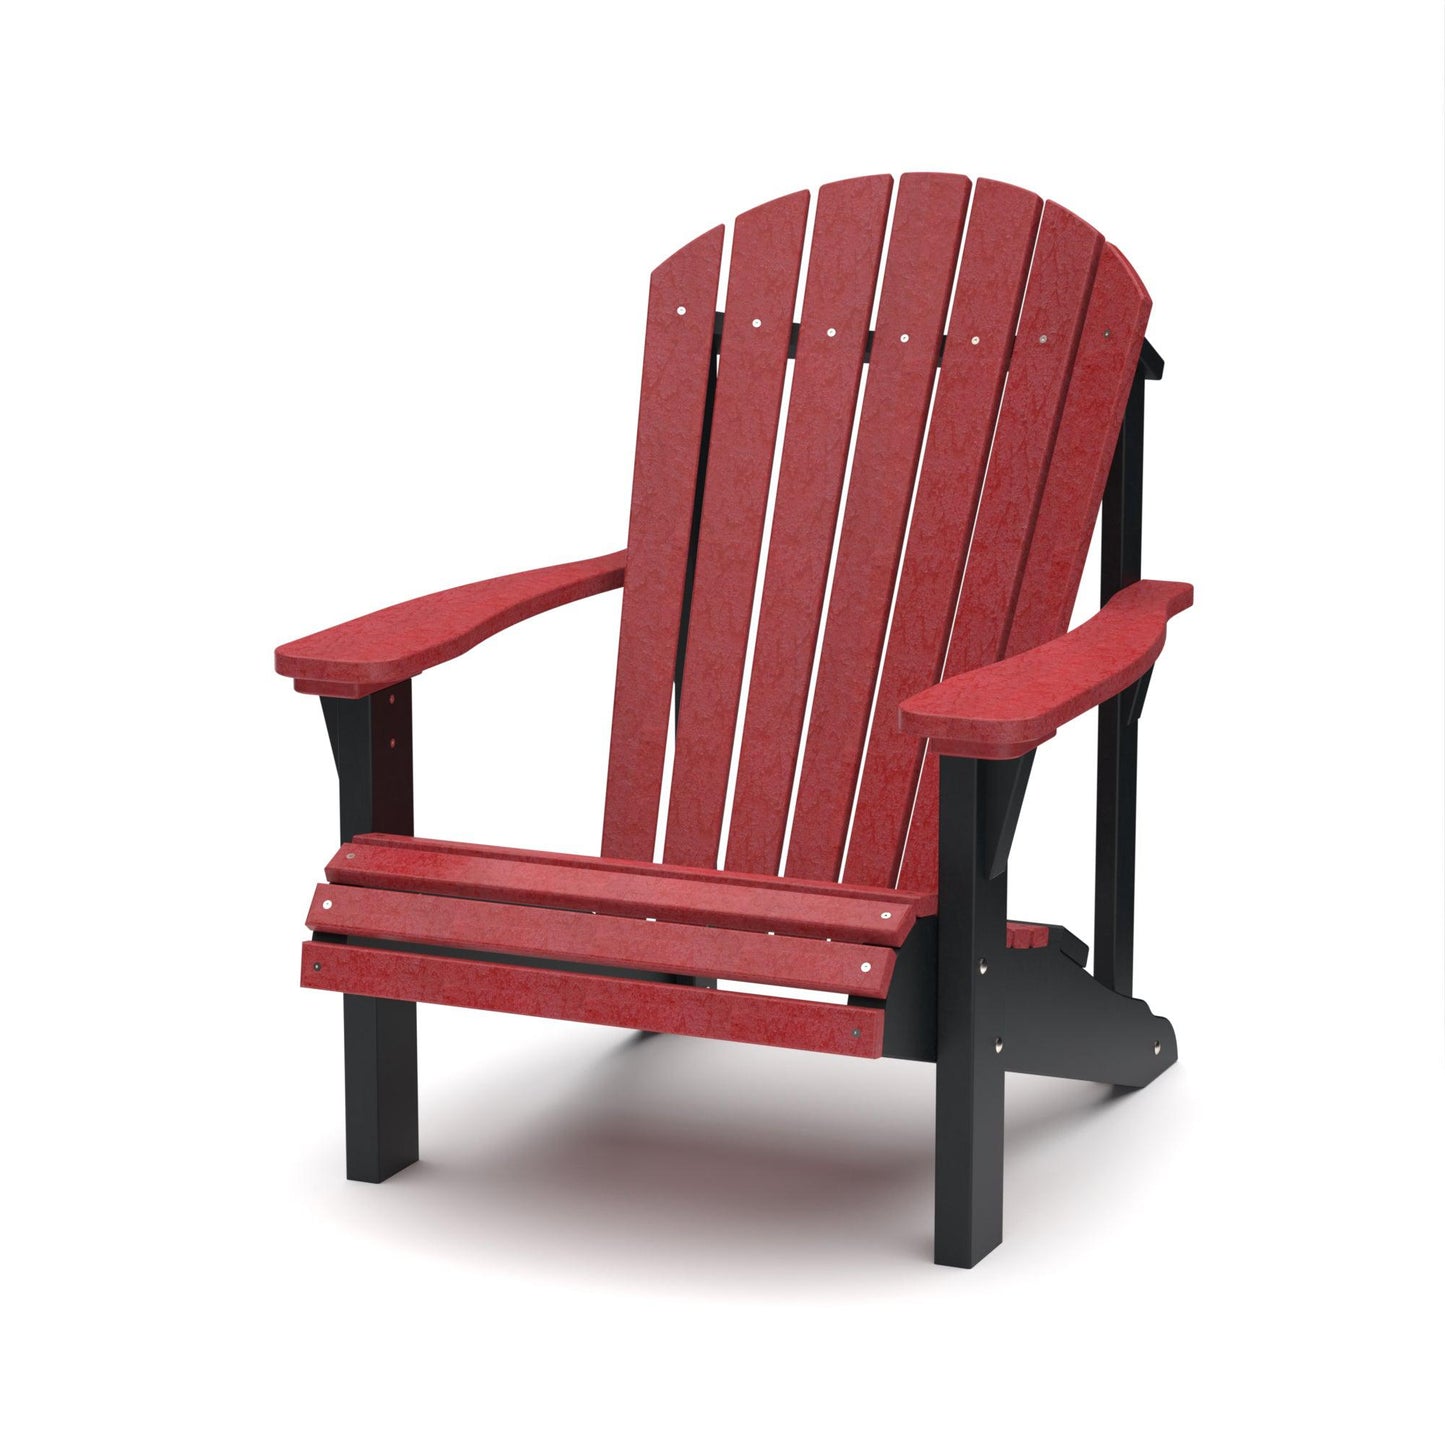 Wildridge LCC-111  Recycled Plastic Heritage Adirondack Chair (QUICK SHIP) - LEAD TIME TO SHIP 3 TO 4 BUSINESS DAYS